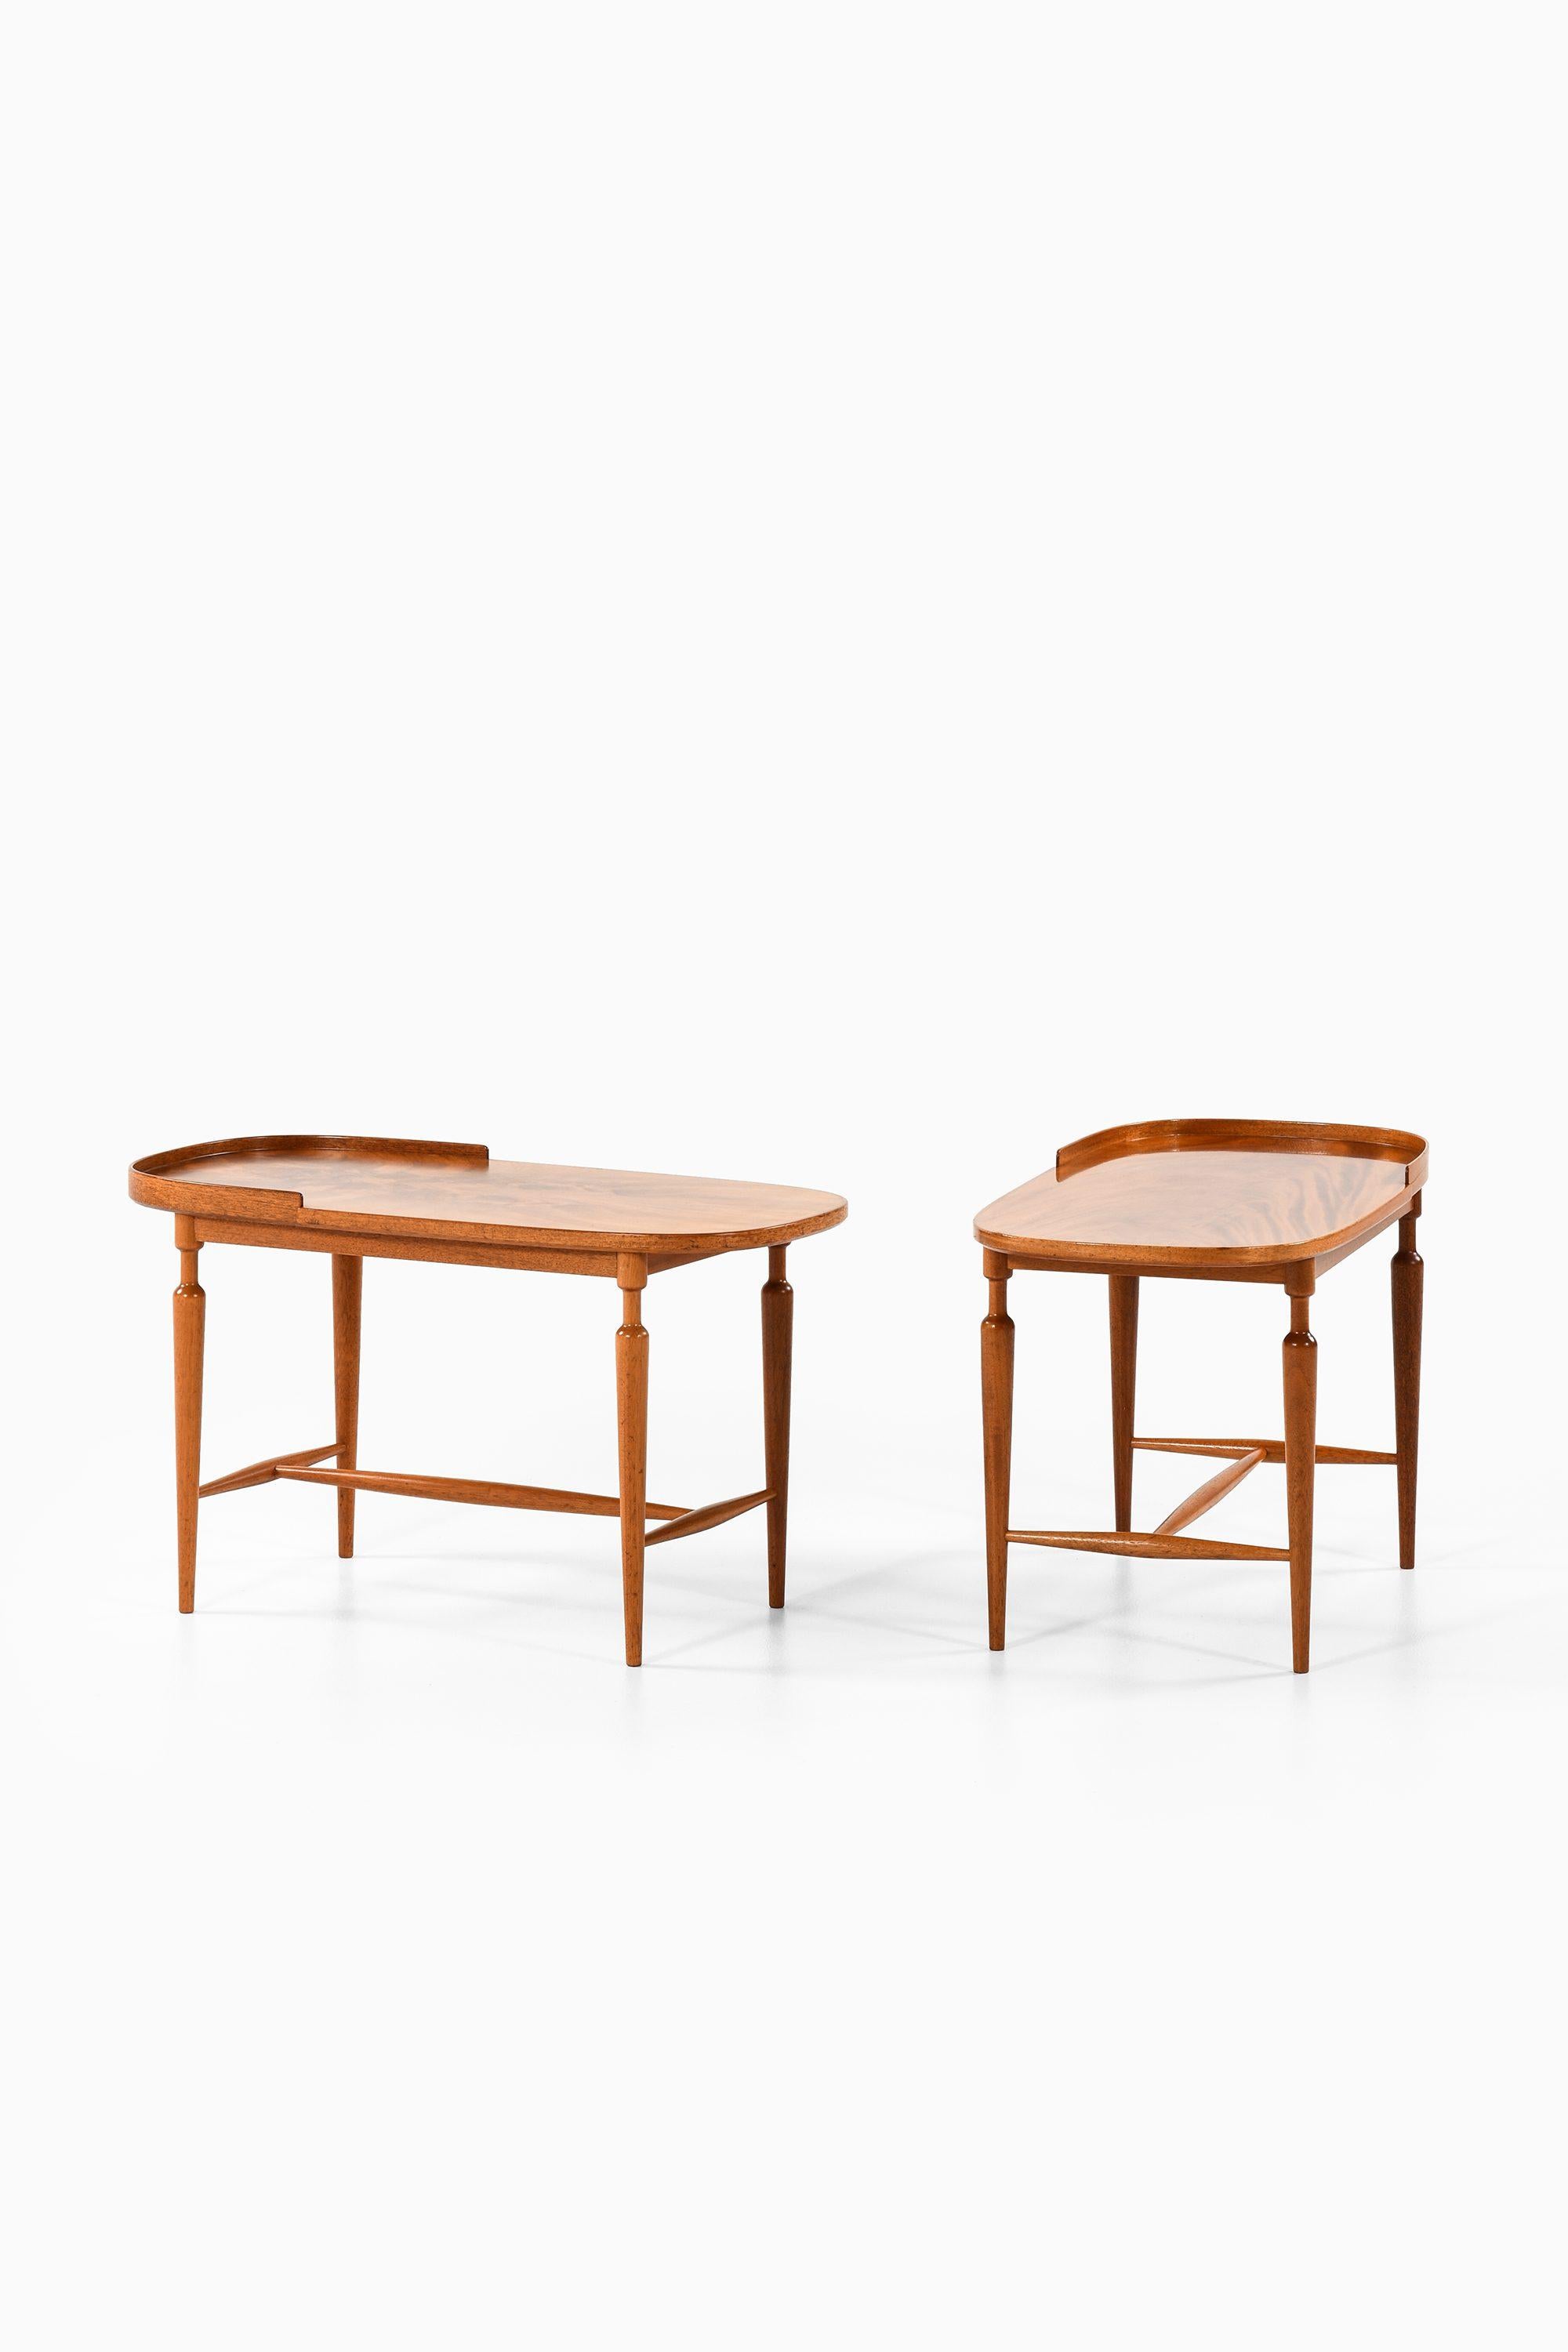 Pair of Side Table in Mahogany by Josef Frank, 1939

Additional Information:
Material: Mahogany
Style: Mid century, Scandinavia
Rare pair of side table model 961 / San Francisco
Produced by Svenskt Tenn in Sweden
Dimensions (W x D x H): 40 x 79.5 x